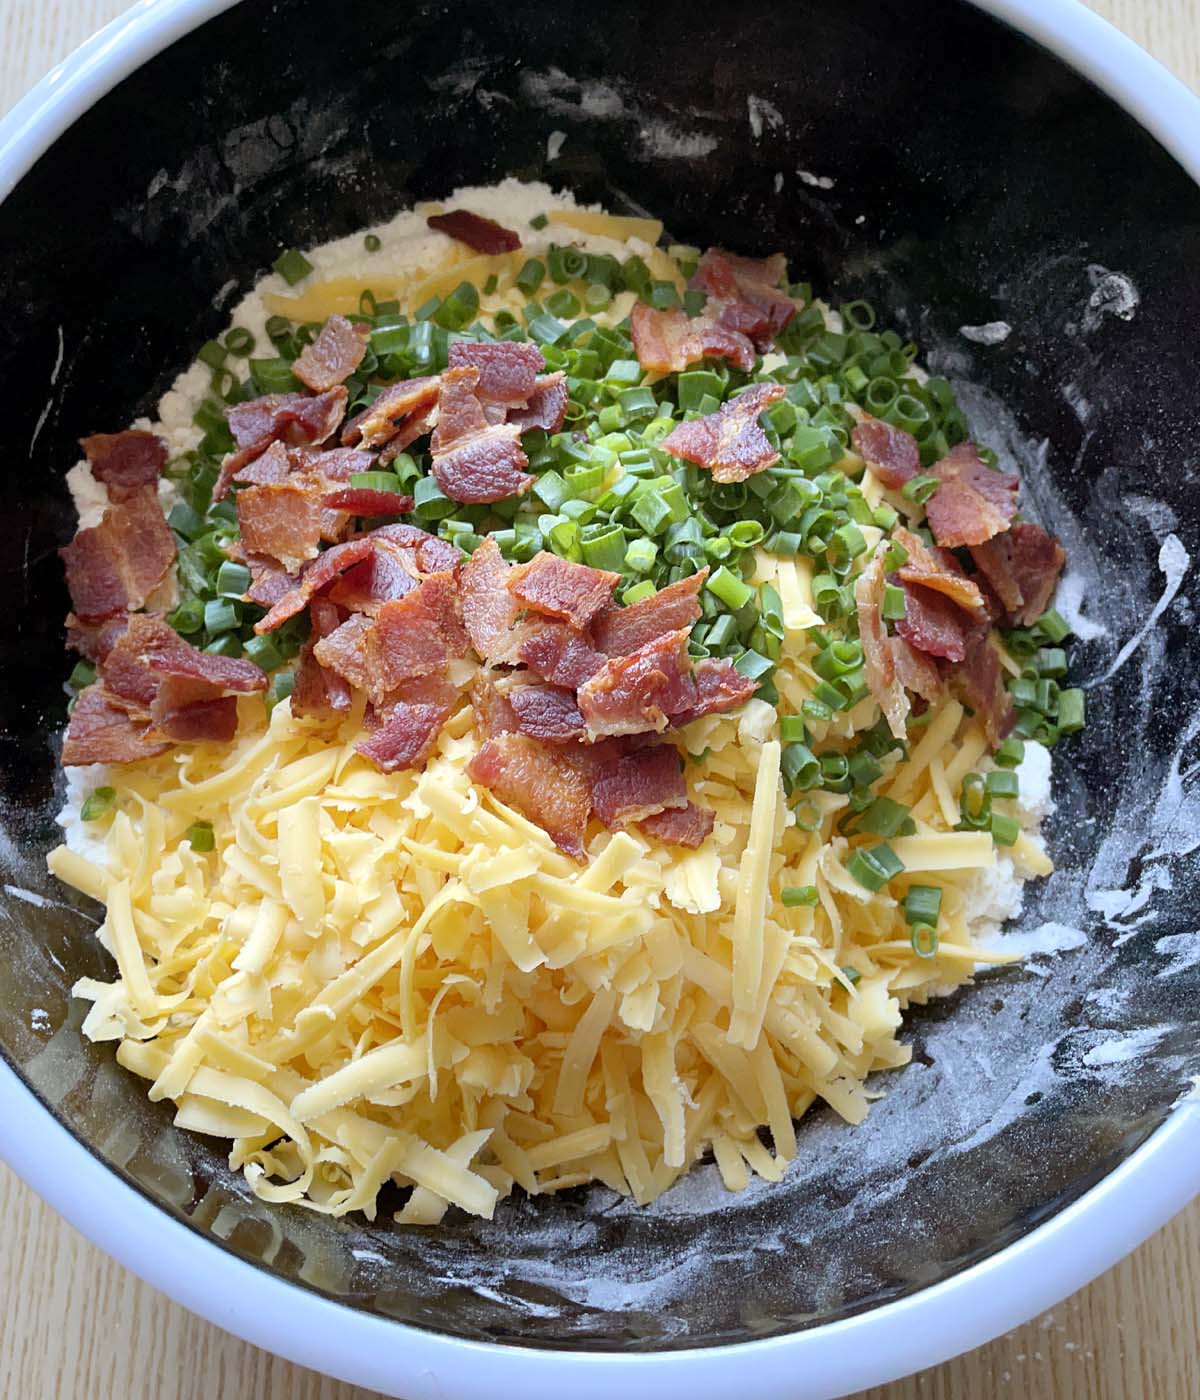 Orange grated cheese, crumbled cooked bacon, and chopped green onions in a round black bowl.